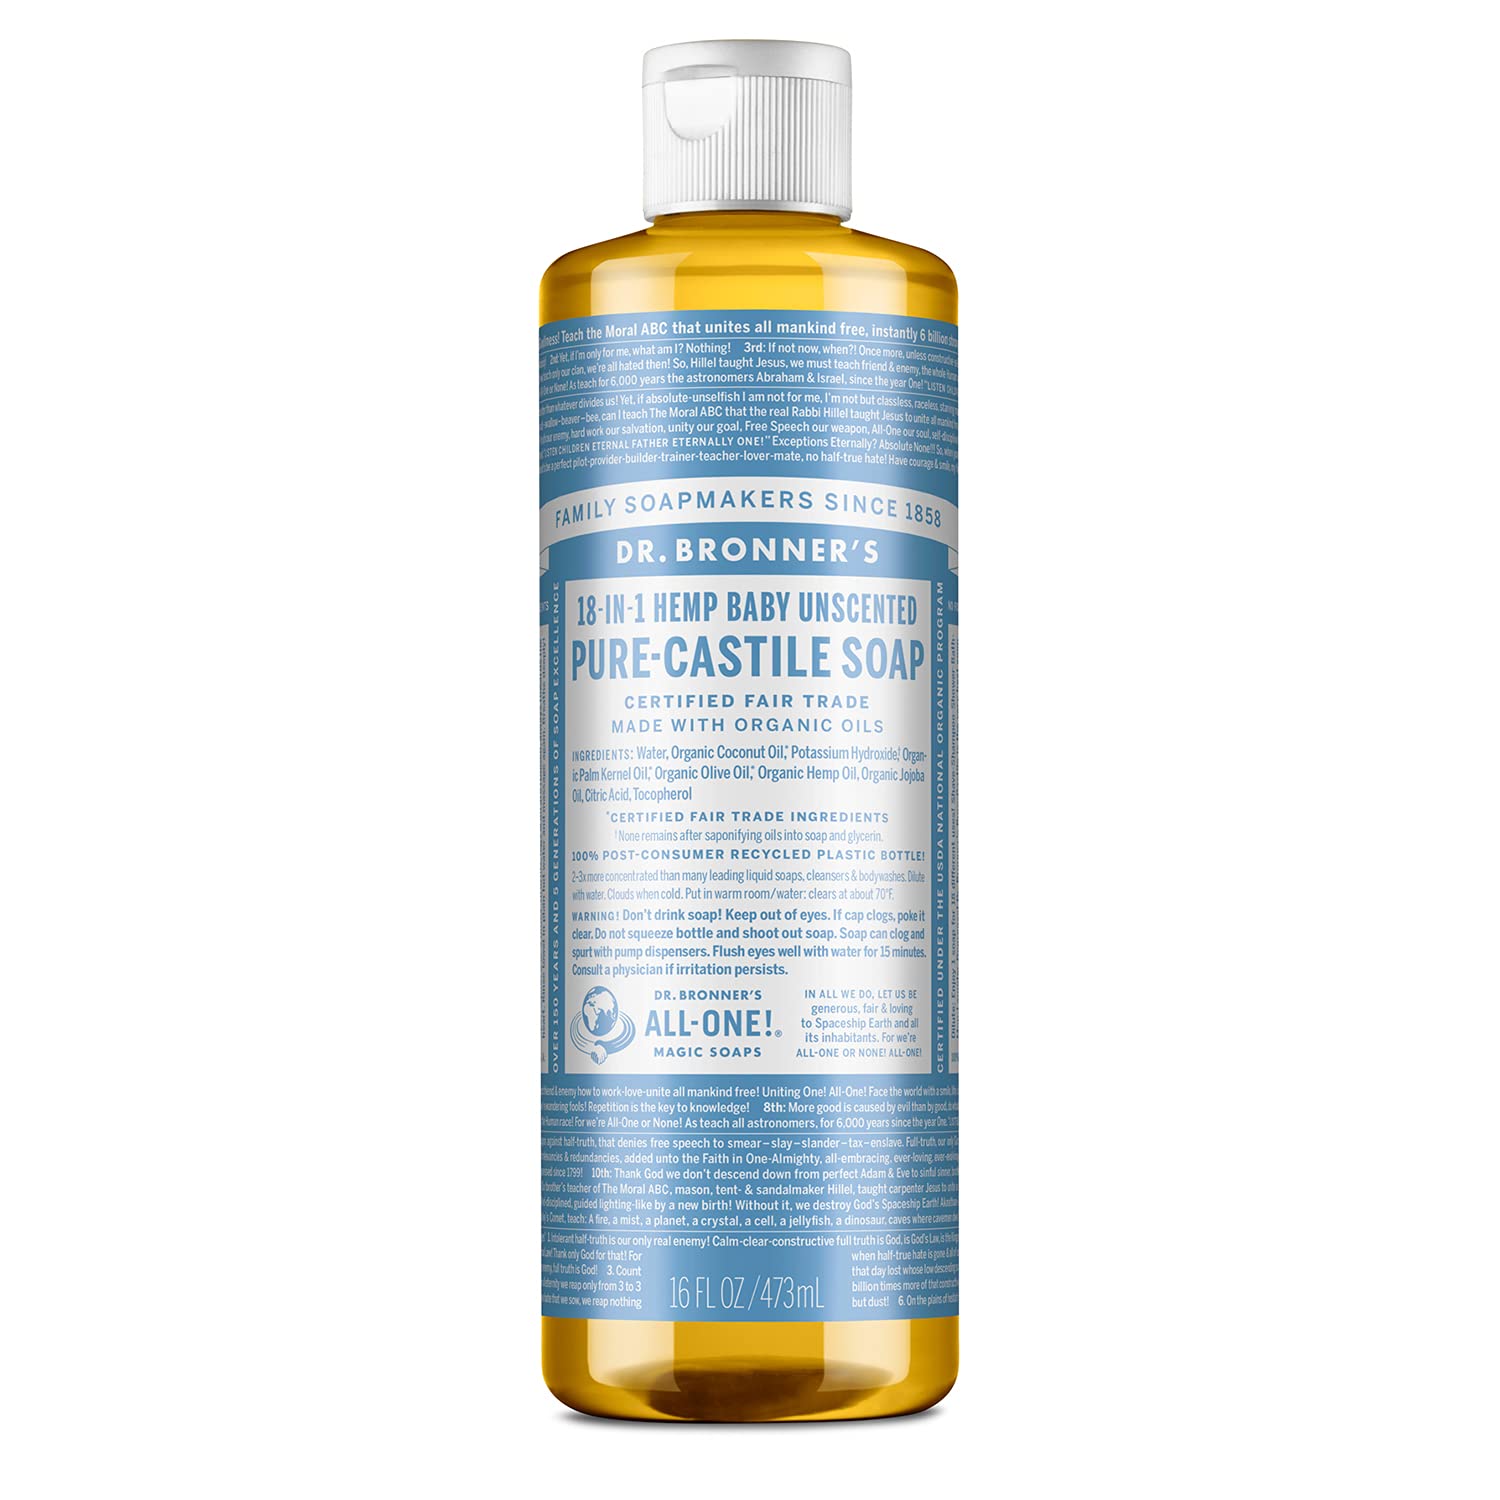 Dr. Bronner’s - Pure-Castile Liquid Soap (Baby Unscented, 16 Ounce) - Made with Organic Oils, 18-in-1 Uses: Face, Hair, Laundry & Dishes For Sensitive Skin & Babies, No Added Fragrance, Vegan, Non-GMO